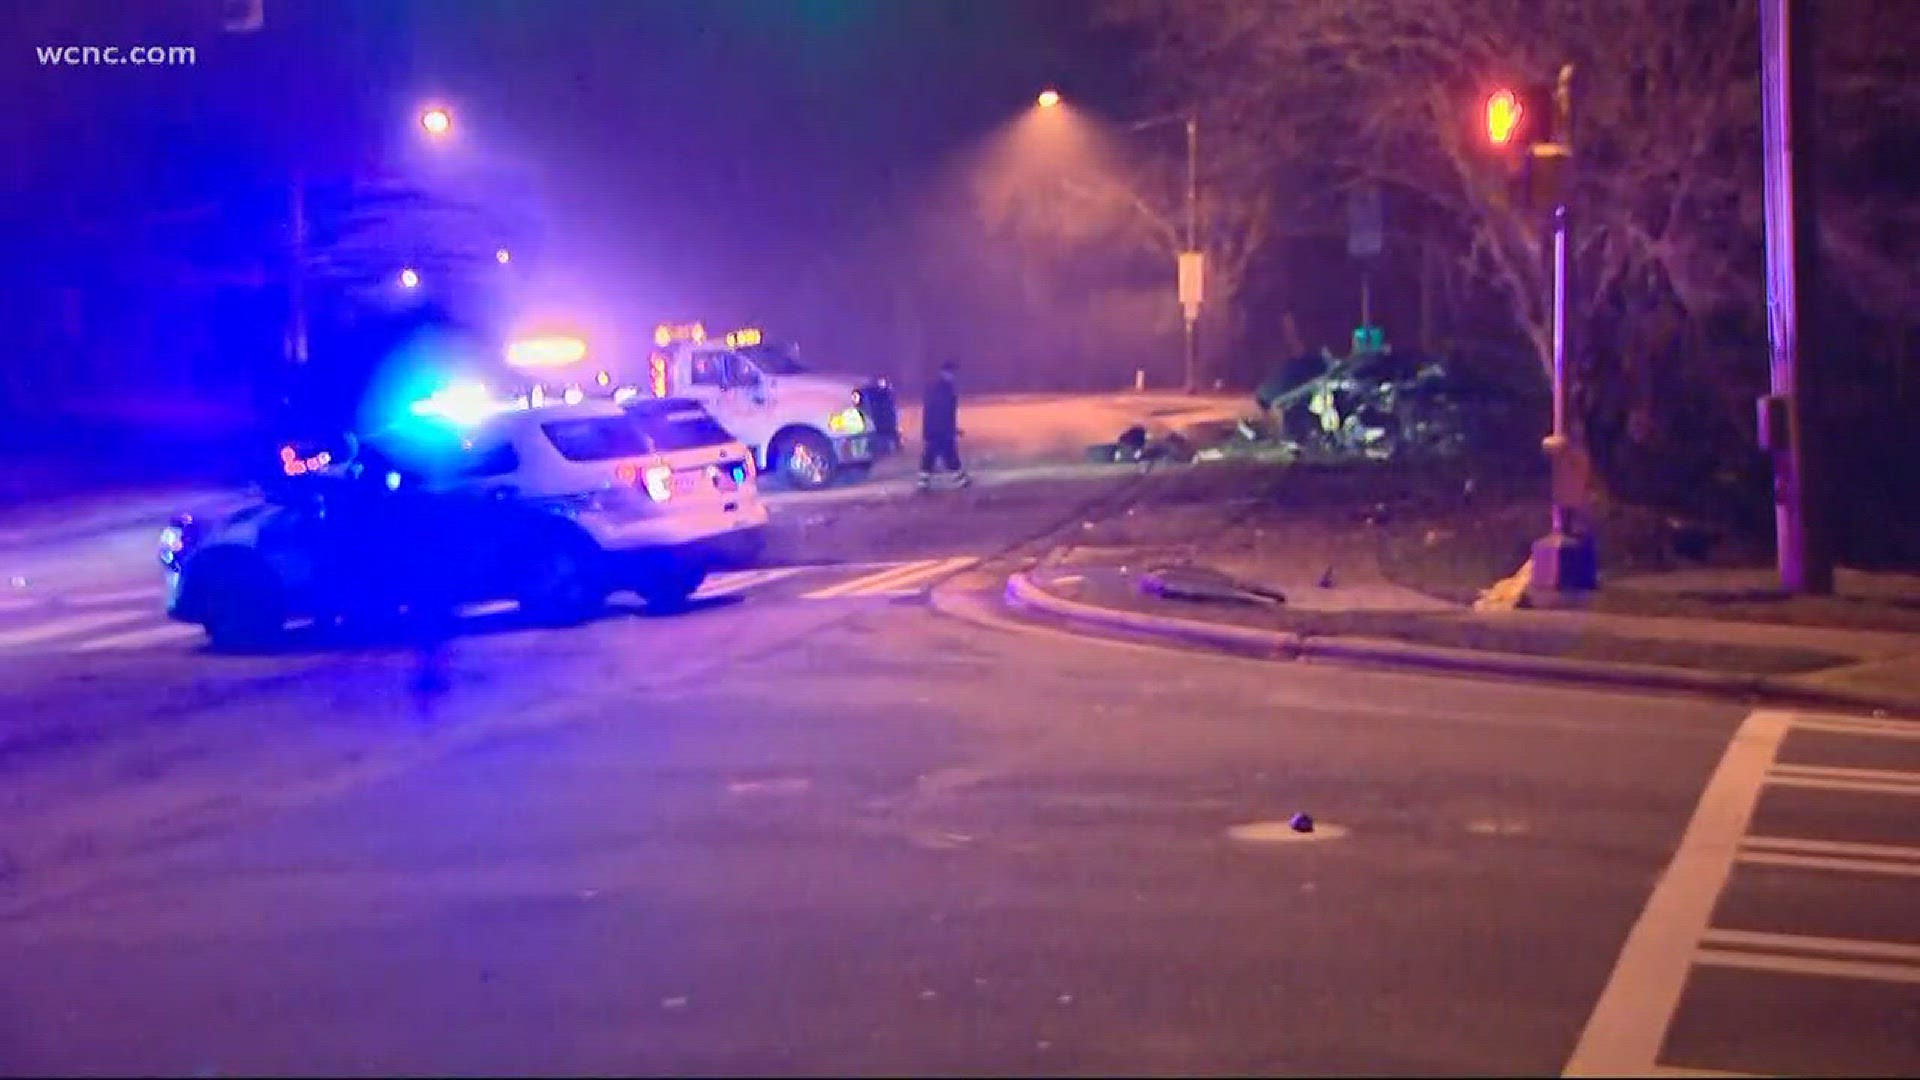 Charlotte-Mecklenburg Police has charged a man in connection with a single-car crash in south Charlotte early Sunday that left one woman dead.